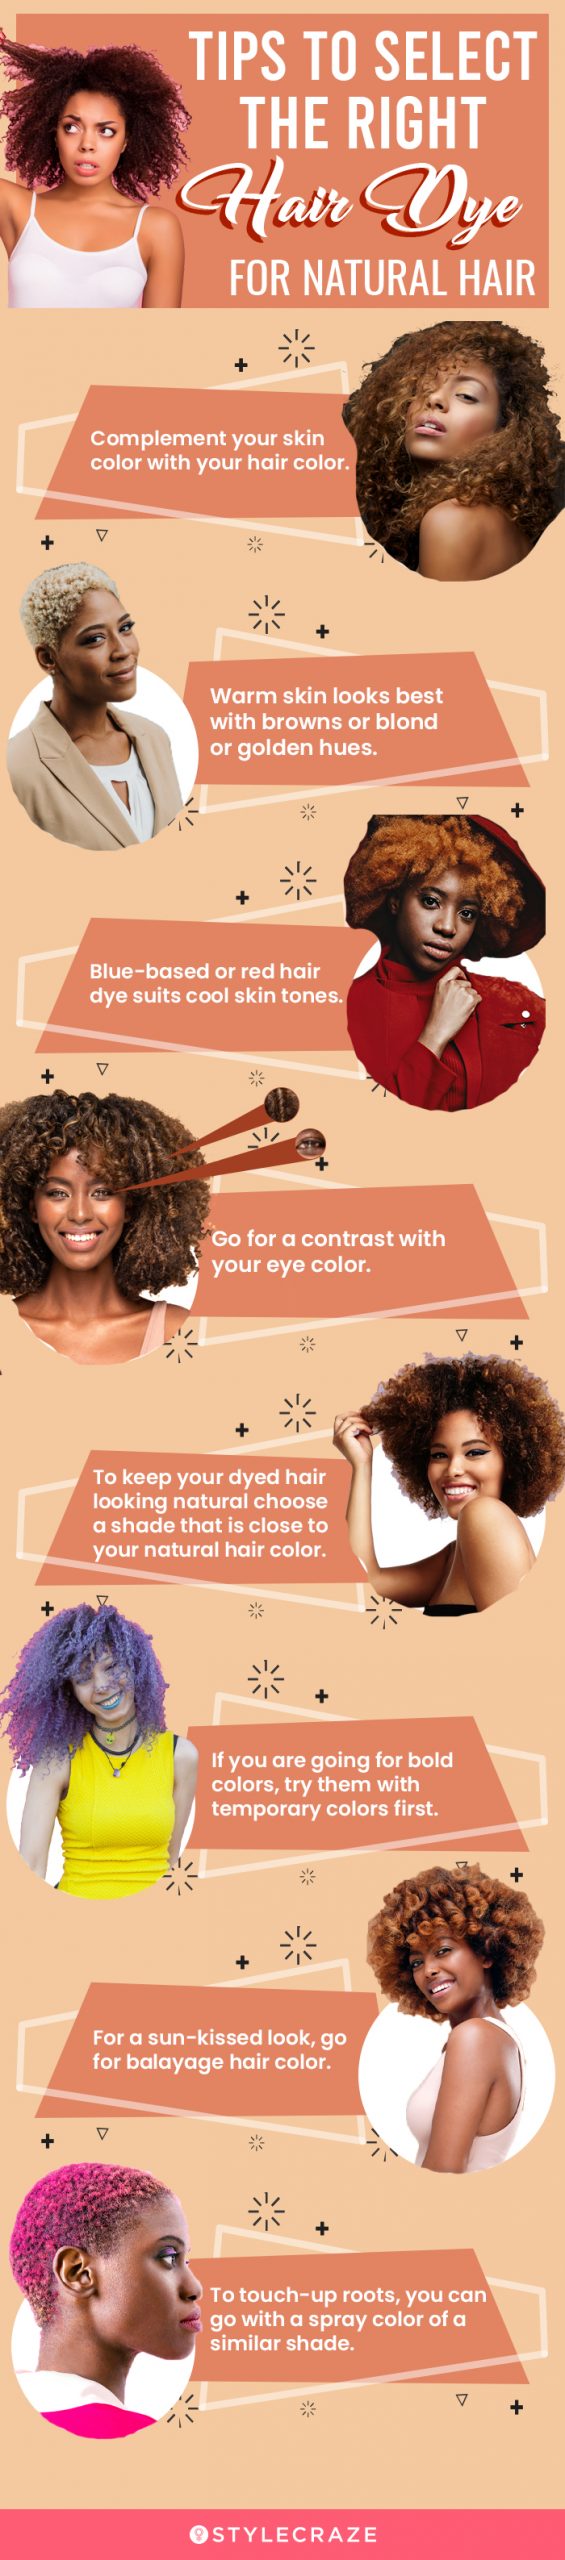 Tips To Select The Right Hair Dye For Natural Hair